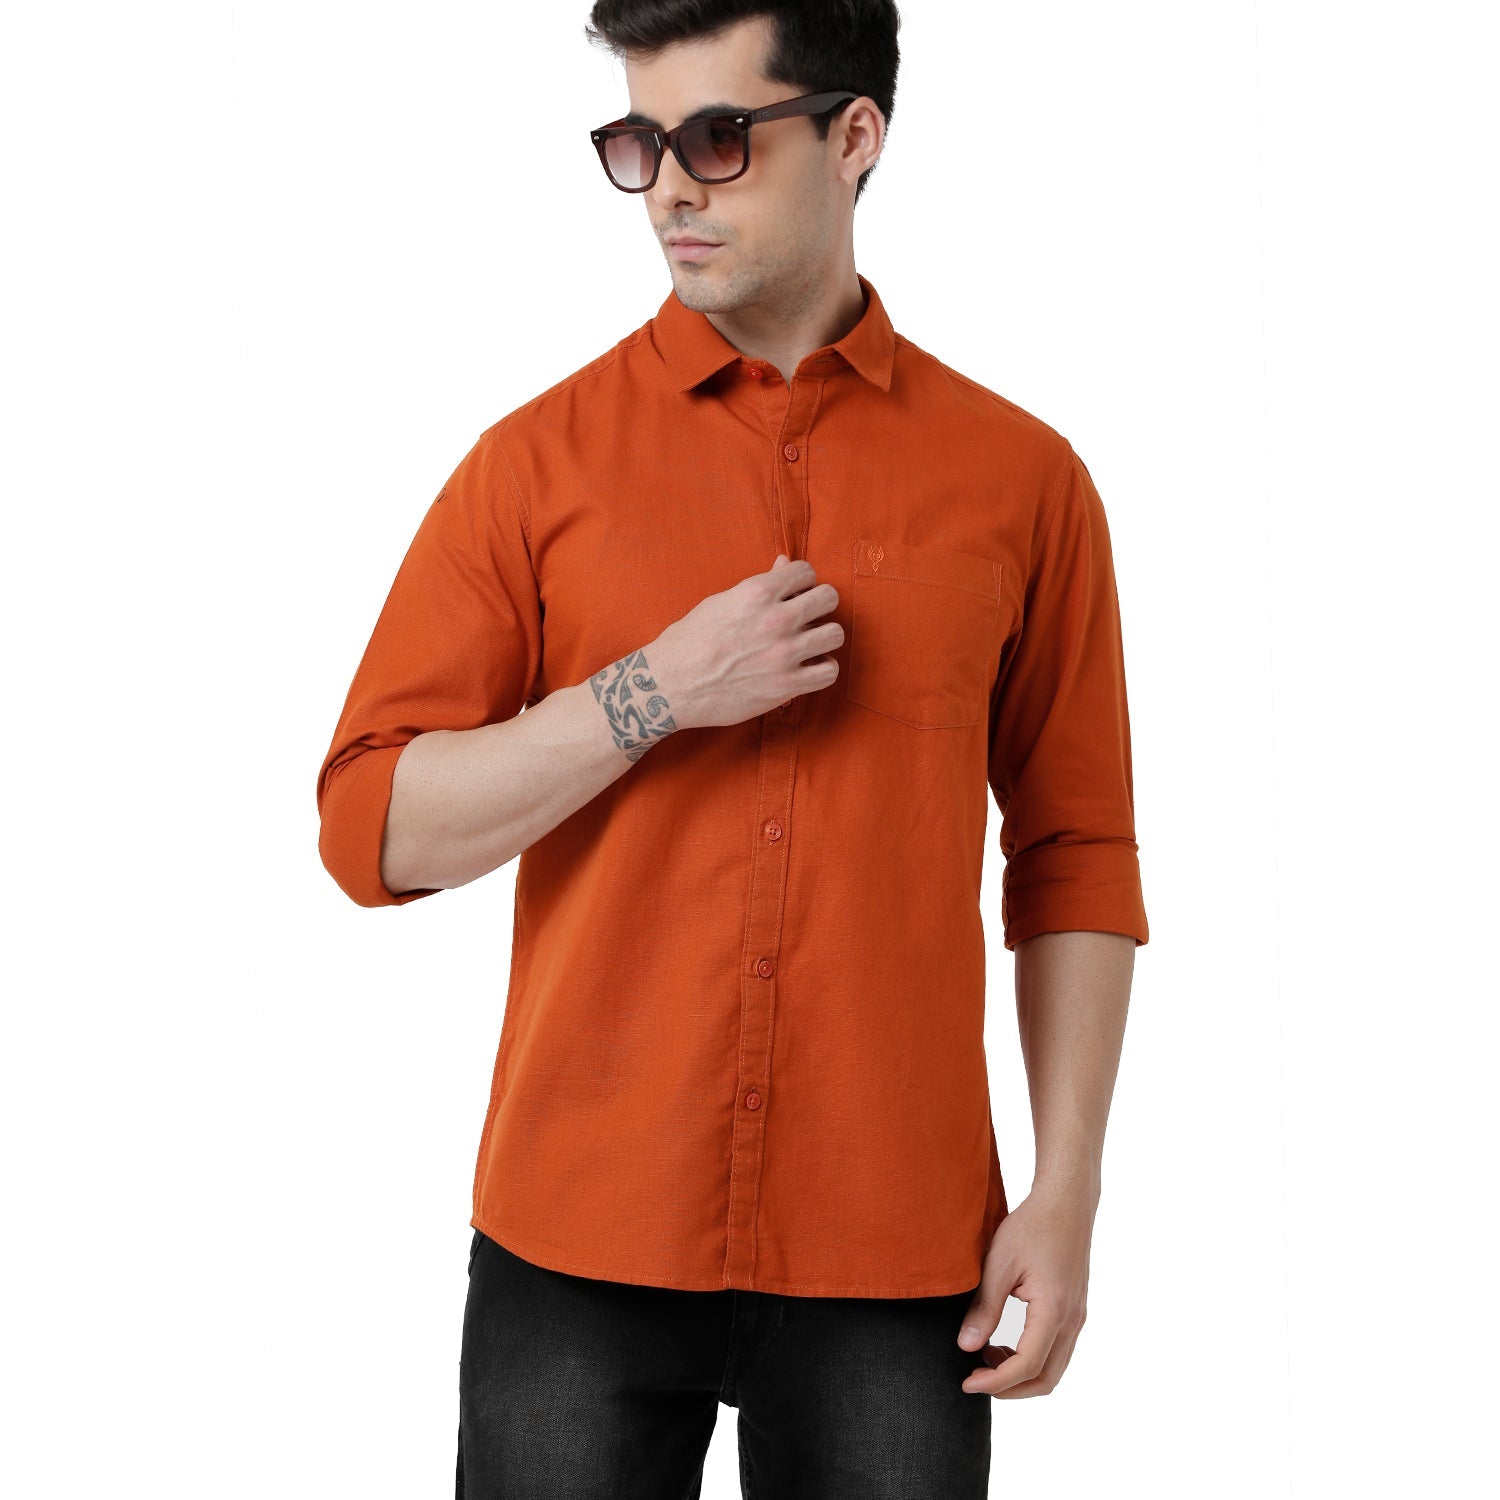 Classic Polo Mens Solid Slim Fit Full Sleeve Orange Color Shirt - SN1-111 C Shirts Classic Polo 